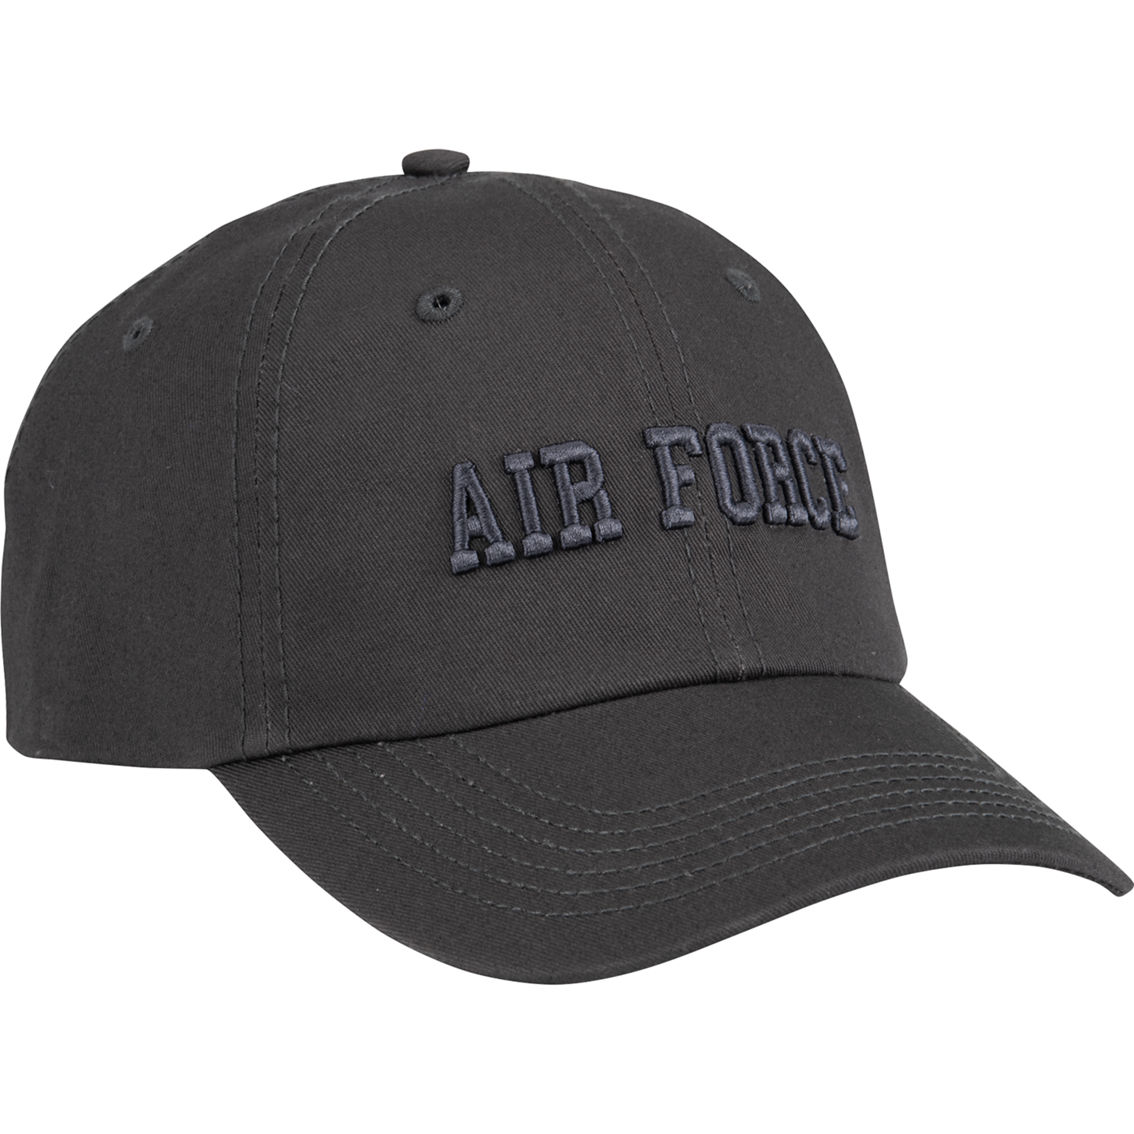 Blync Army or Air Force Black Low Profile Cap - Image 2 of 3